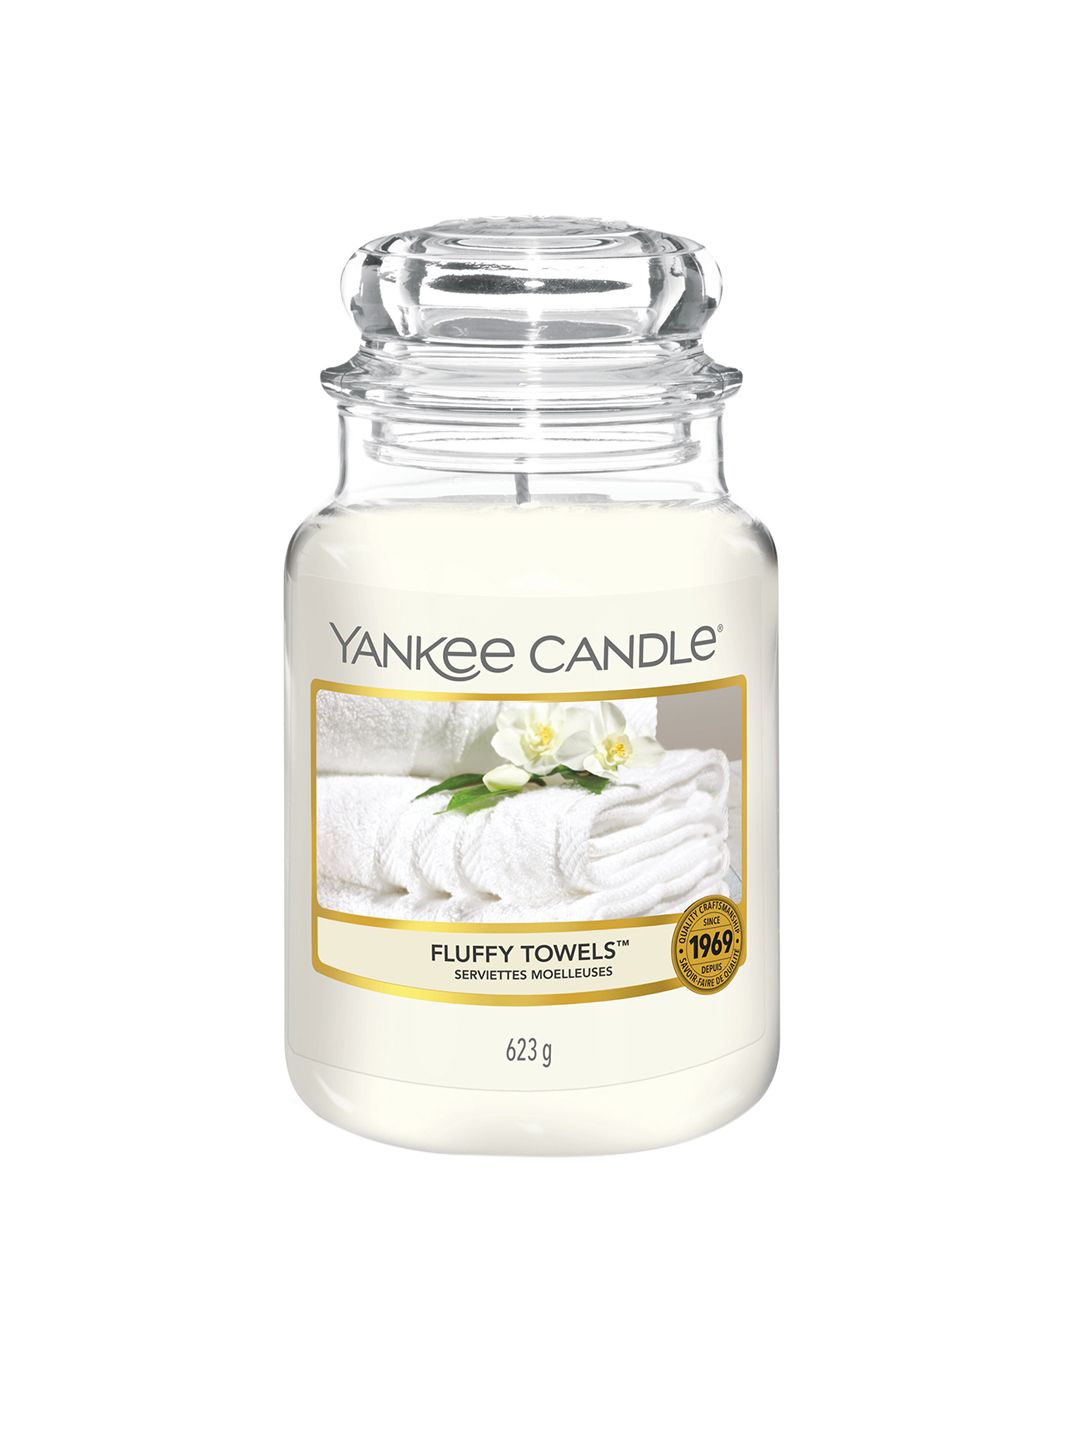 YANKEE CANDLE White Fluffy Towels Scented Candle Price in India